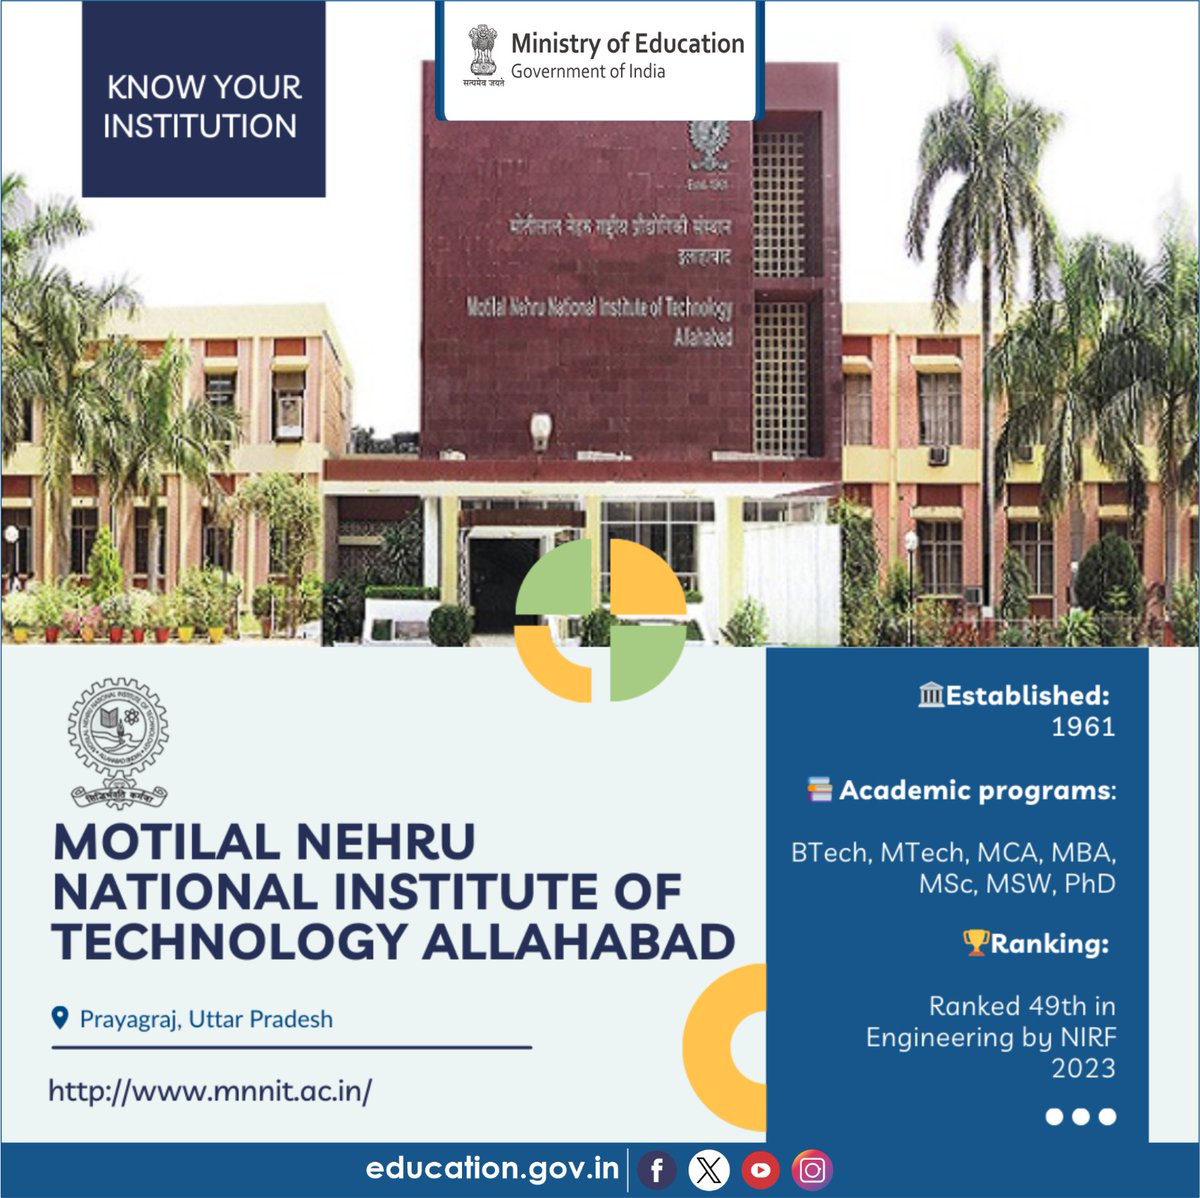 Know about the HEIs of India! Motilal Nehru National Institute of Technology (MNNIT) Allahabad, Prayagraj is an Institute with a total commitment to quality and excellence in academic pursuits. Established in 1961 as one of India's seventeen Regional Engineering Colleges, MNNIT